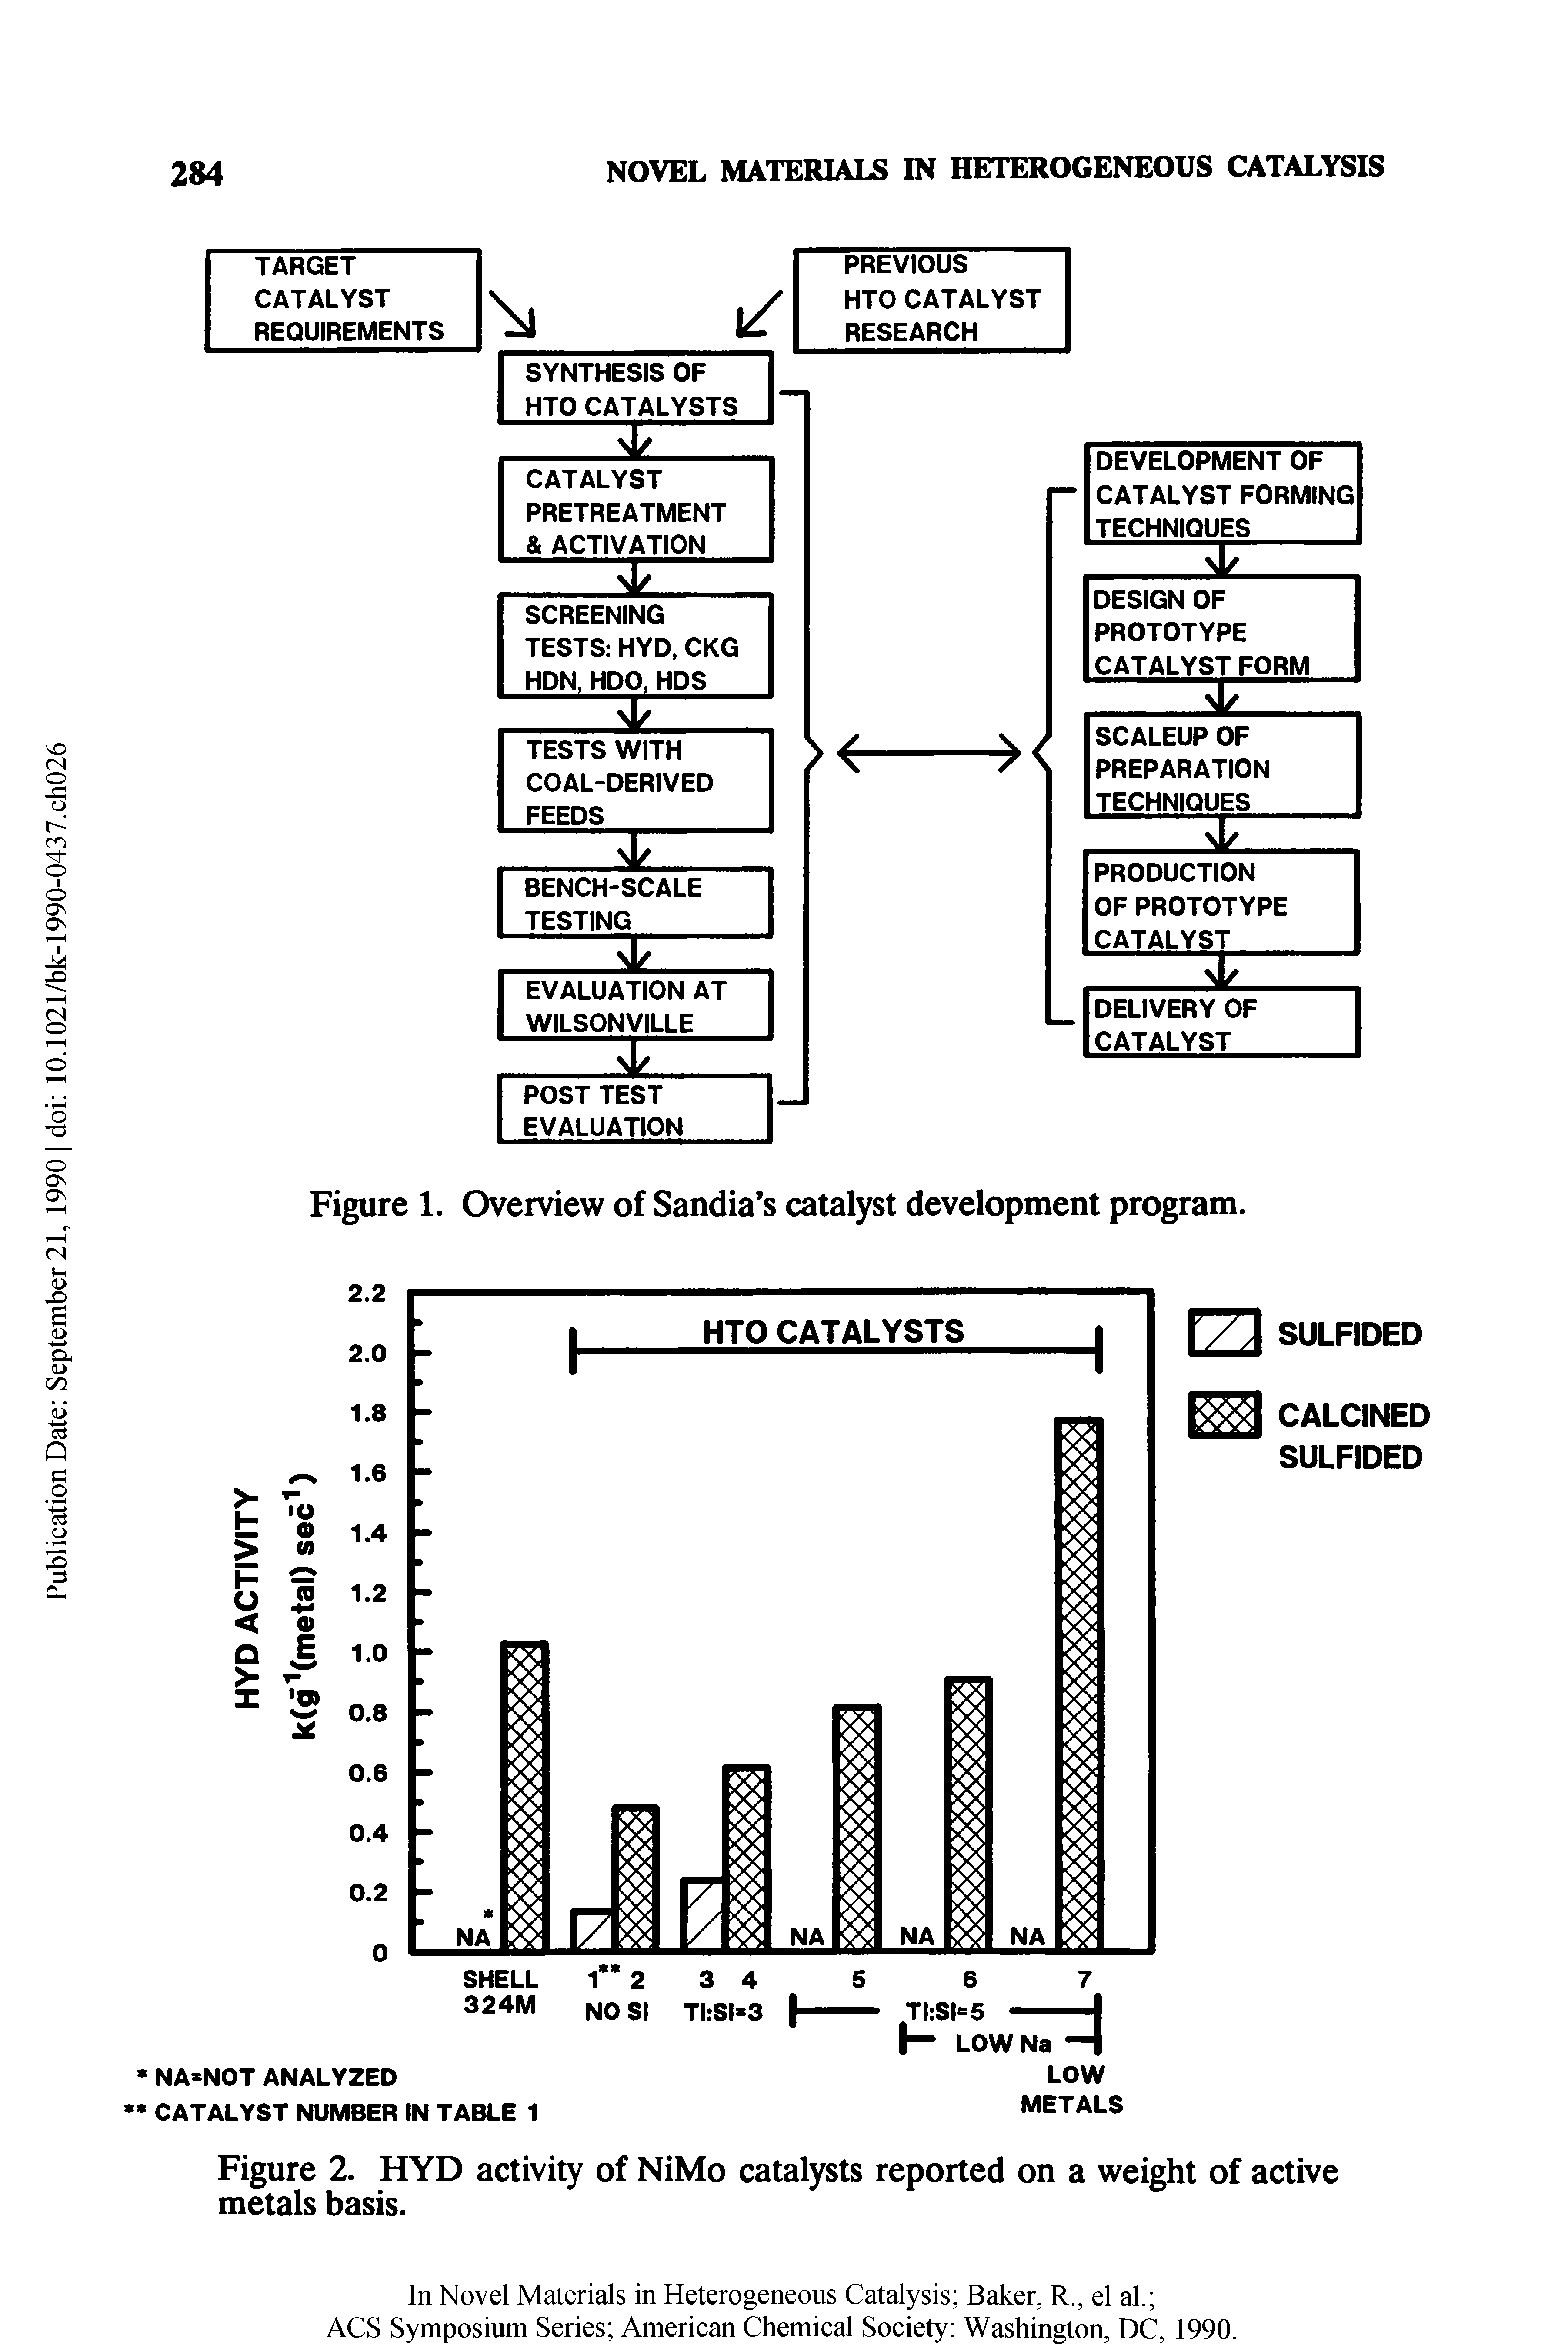 Figure 2. HYD activity of NiMo catalysts reported on a weight of active metals basis.